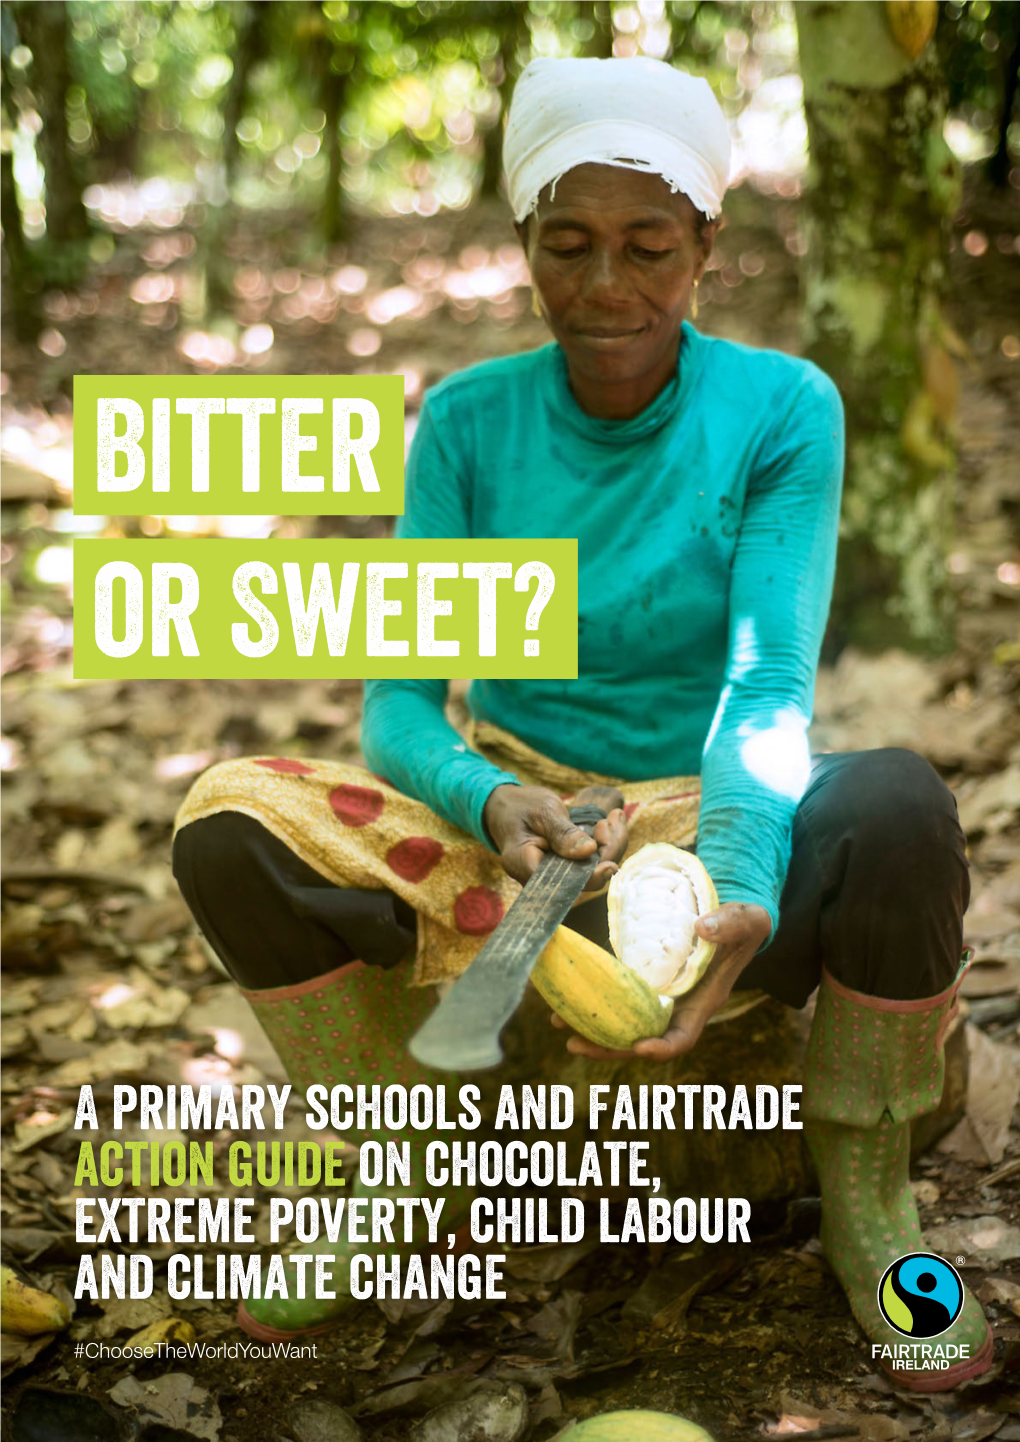 A Primary Schools and Fairtrade Action Guide on Chocolate, Extreme Poverty, Child Labour and Climate Change